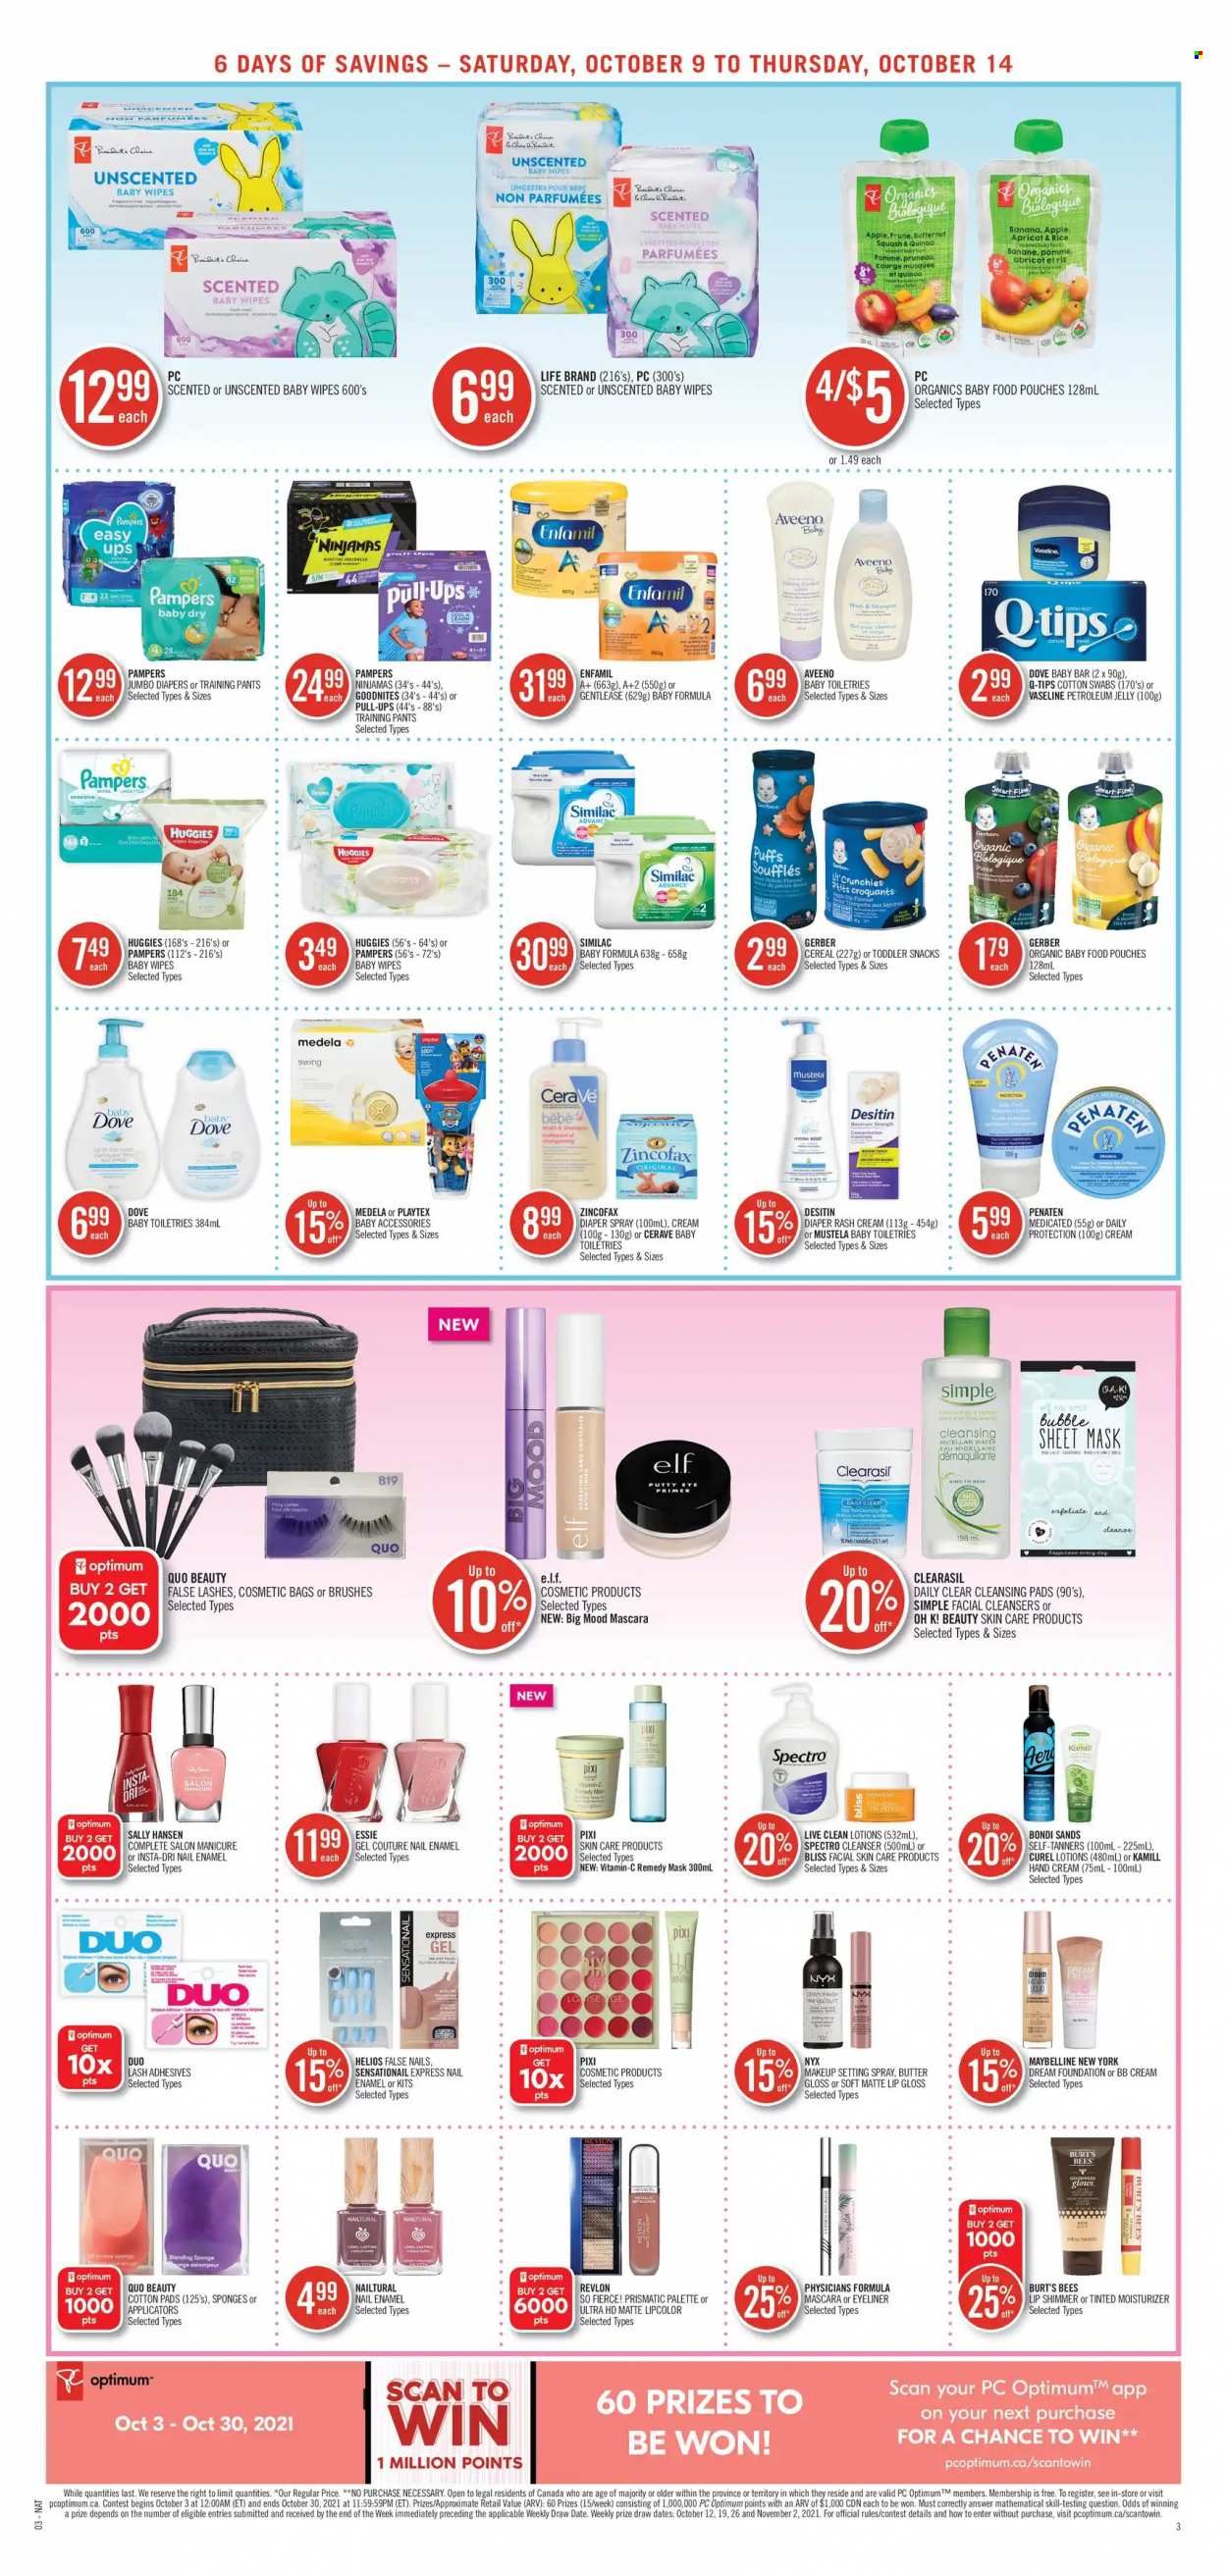 thumbnail - Shoppers Drug Mart Flyer - October 09, 2021 - October 14, 2021 - Sales products - snack, Gerber, cereals, puffs, rice, Enfamil, Similac, organic baby food, wipes, pants, baby wipes, nappies, baby pants, Aveeno, petroleum jelly, Vaseline, Playtex, CeraVe, cleanser, micellar water, moisturizer, Curél, NYX Cosmetics, Bondi Sands, Revlon, Palette, hand cream, cosmetic bag, manicure, nail enamel, makeup, mascara, eyeliner, setting spray, Desitin, Dove, Maybelline, quinoa, Sally Hansen, Huggies, Pampers. Page 3.